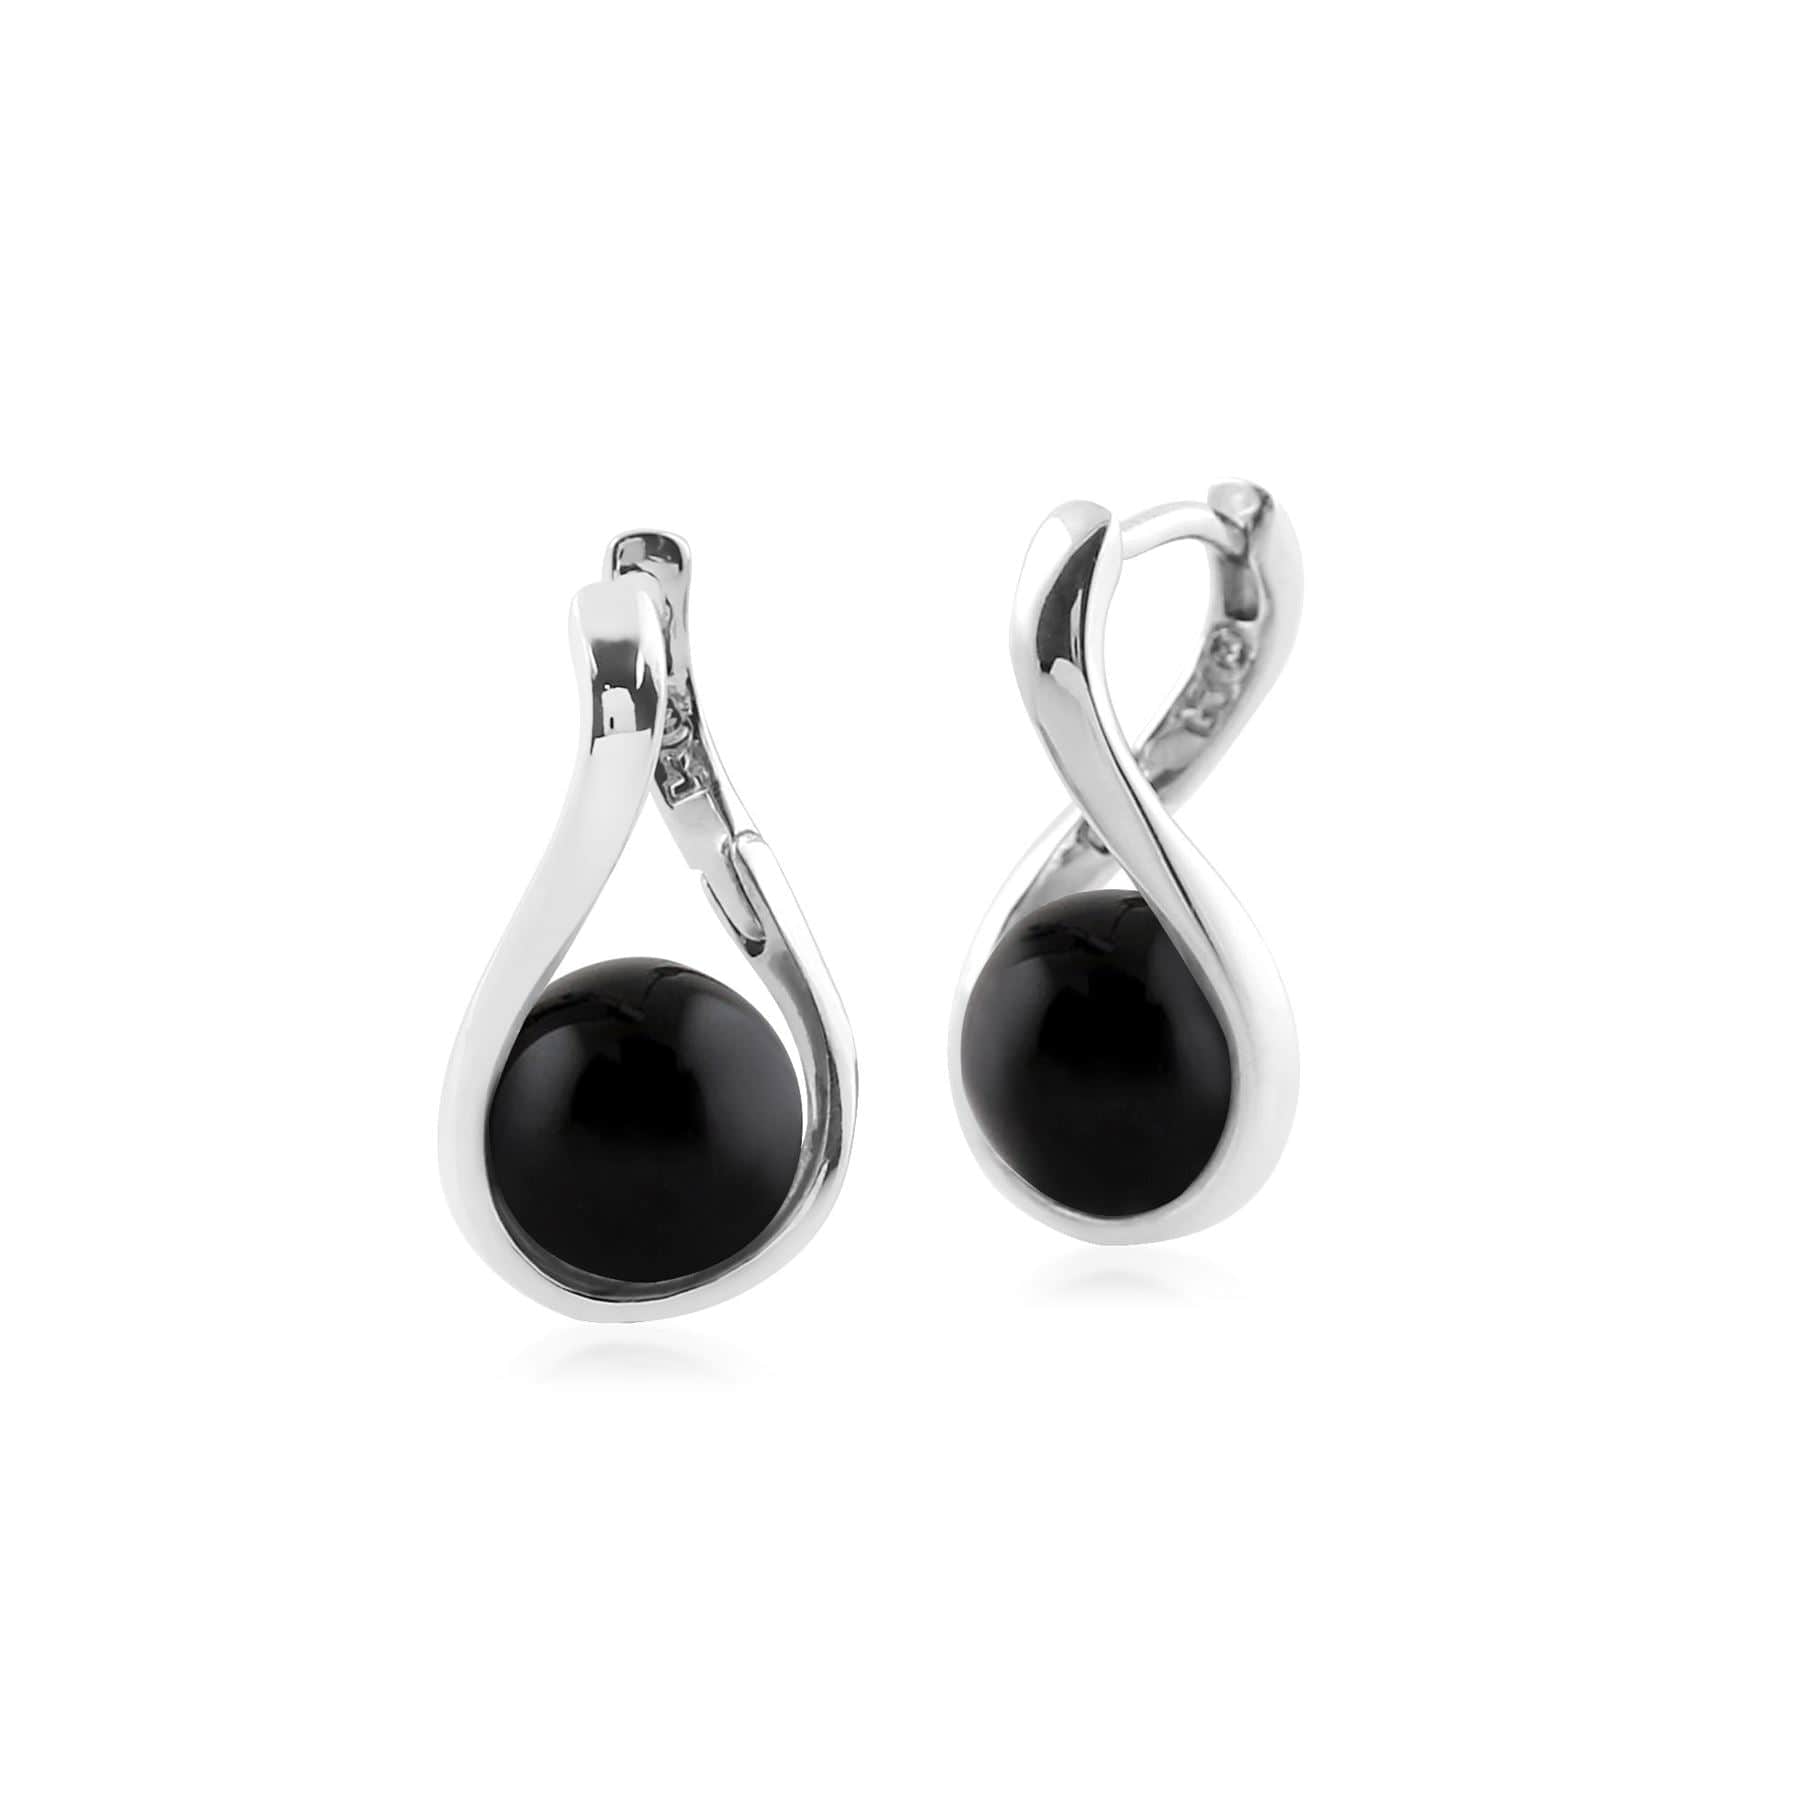 267E023803 Kosmos Round Ball Shaped Black Onyx Earrings in Rhodium Plated Sterling Silver 1